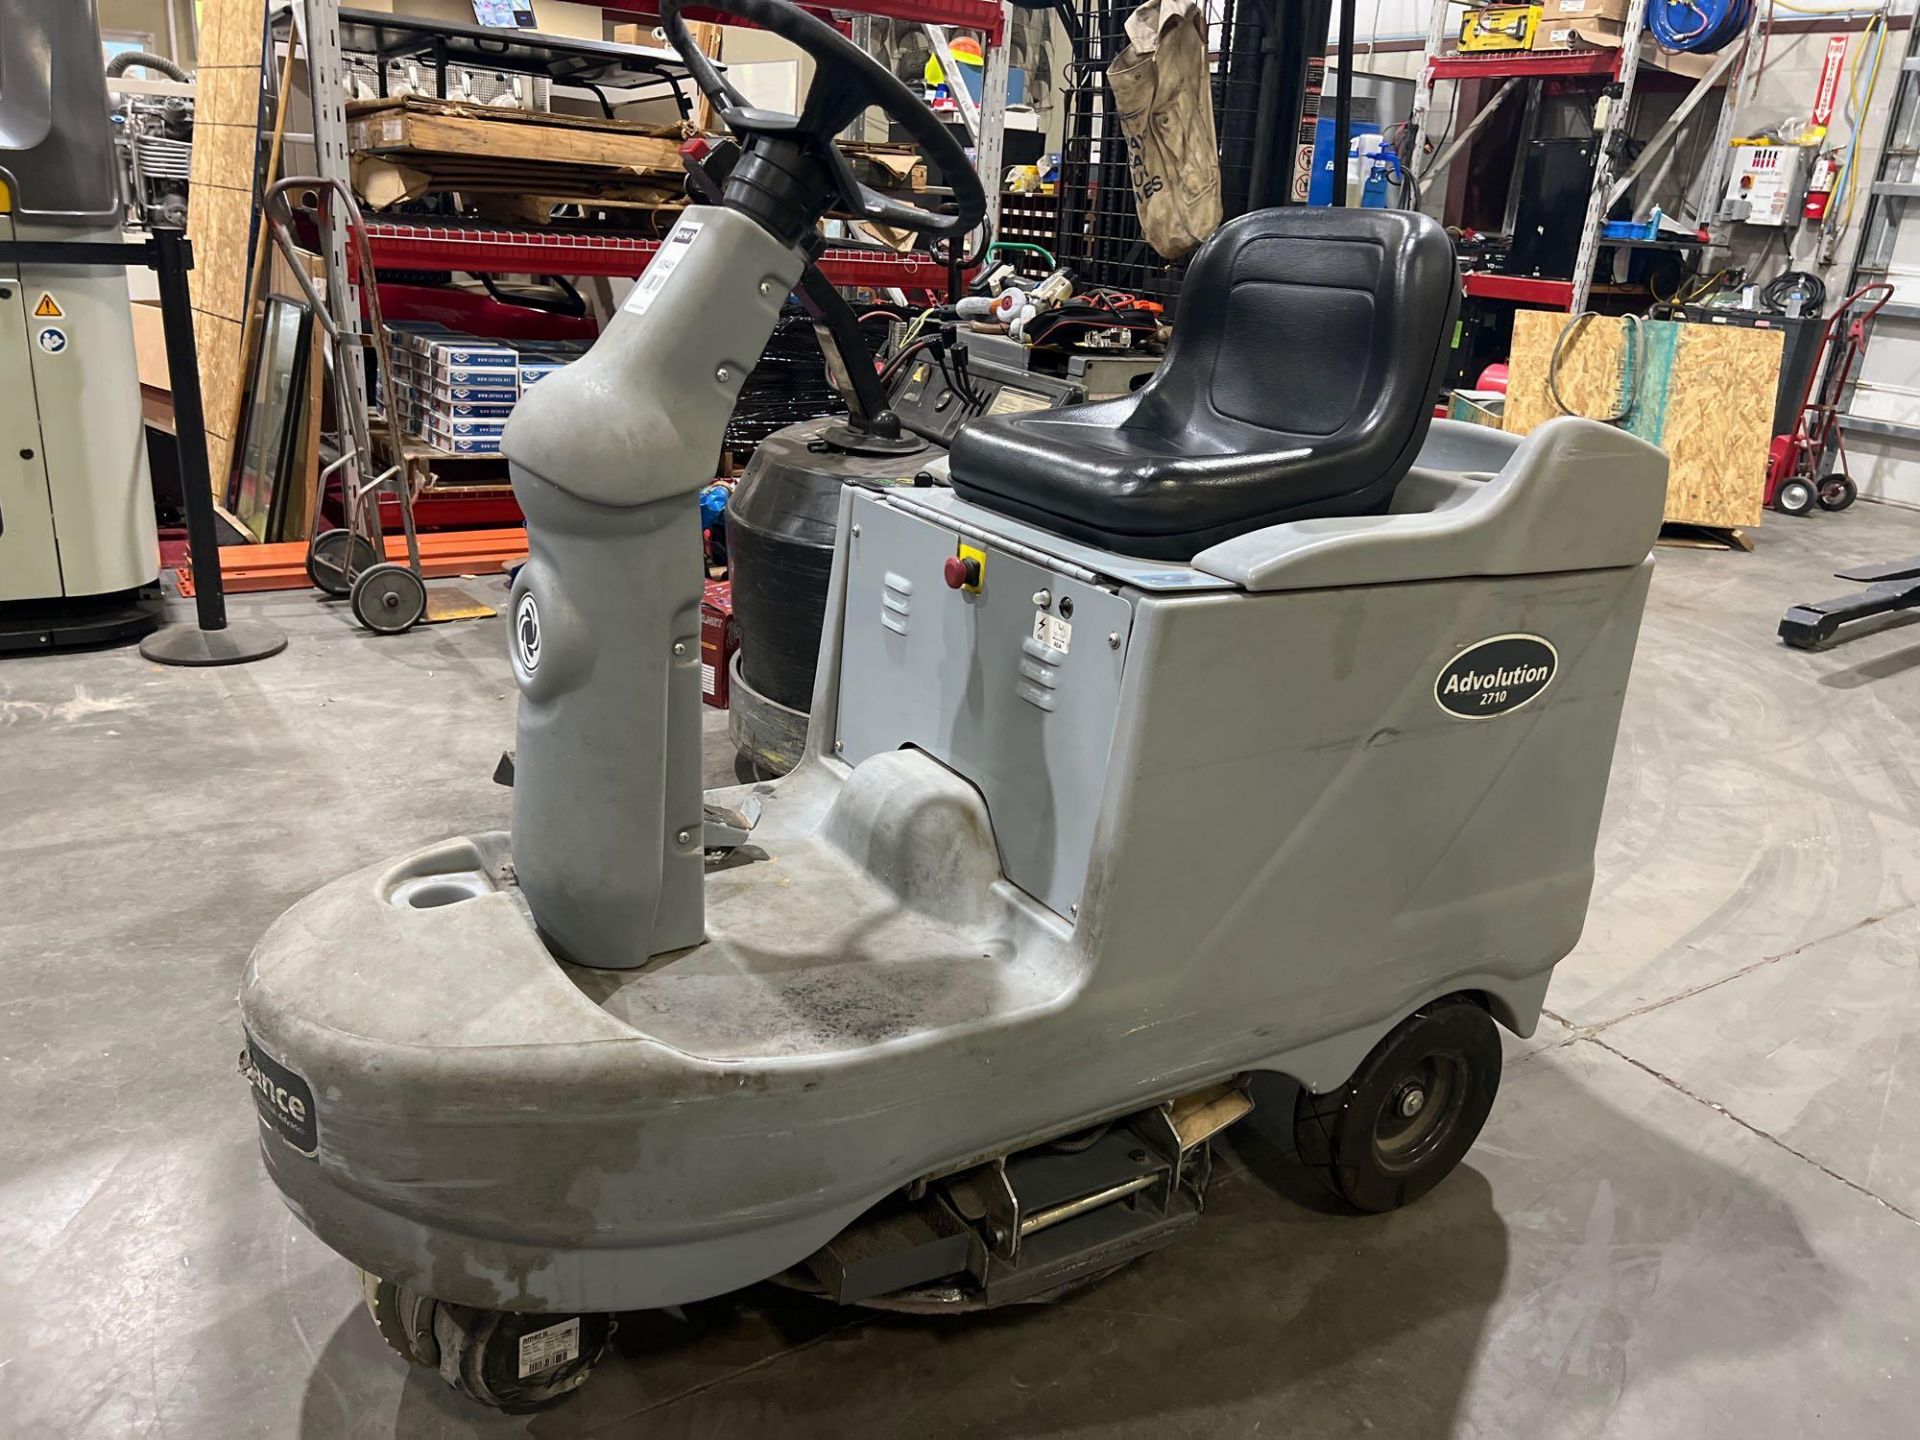 NILFISK ADVANCE RIDE ON FLOOR BURNISHER MODEL ADVOLUTION 2710, ELECTRIC, 36 VOLTS, CONDITION UNKNOW